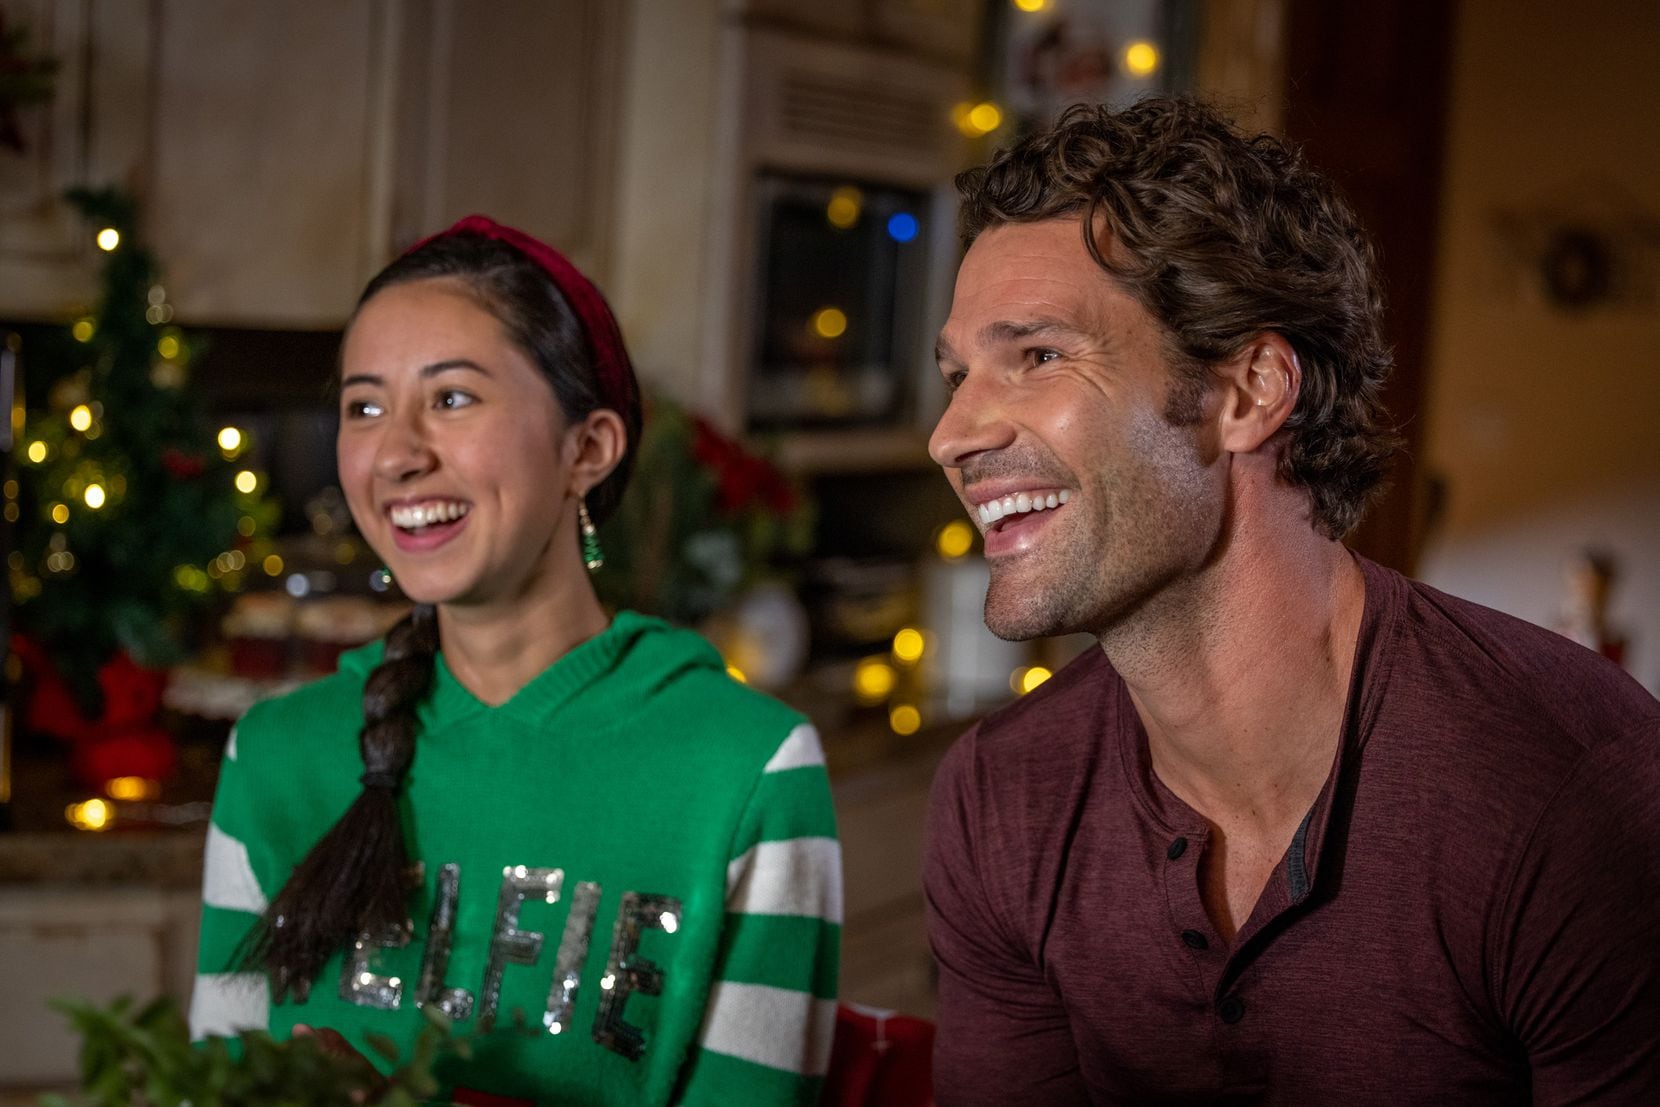 Dakota Winters (Landry Townsend) has a laugh with her uncle, Noah Winters (Aaron O’Connell) in discoveryplus’ holiday movie, Candy Coated Christmas.